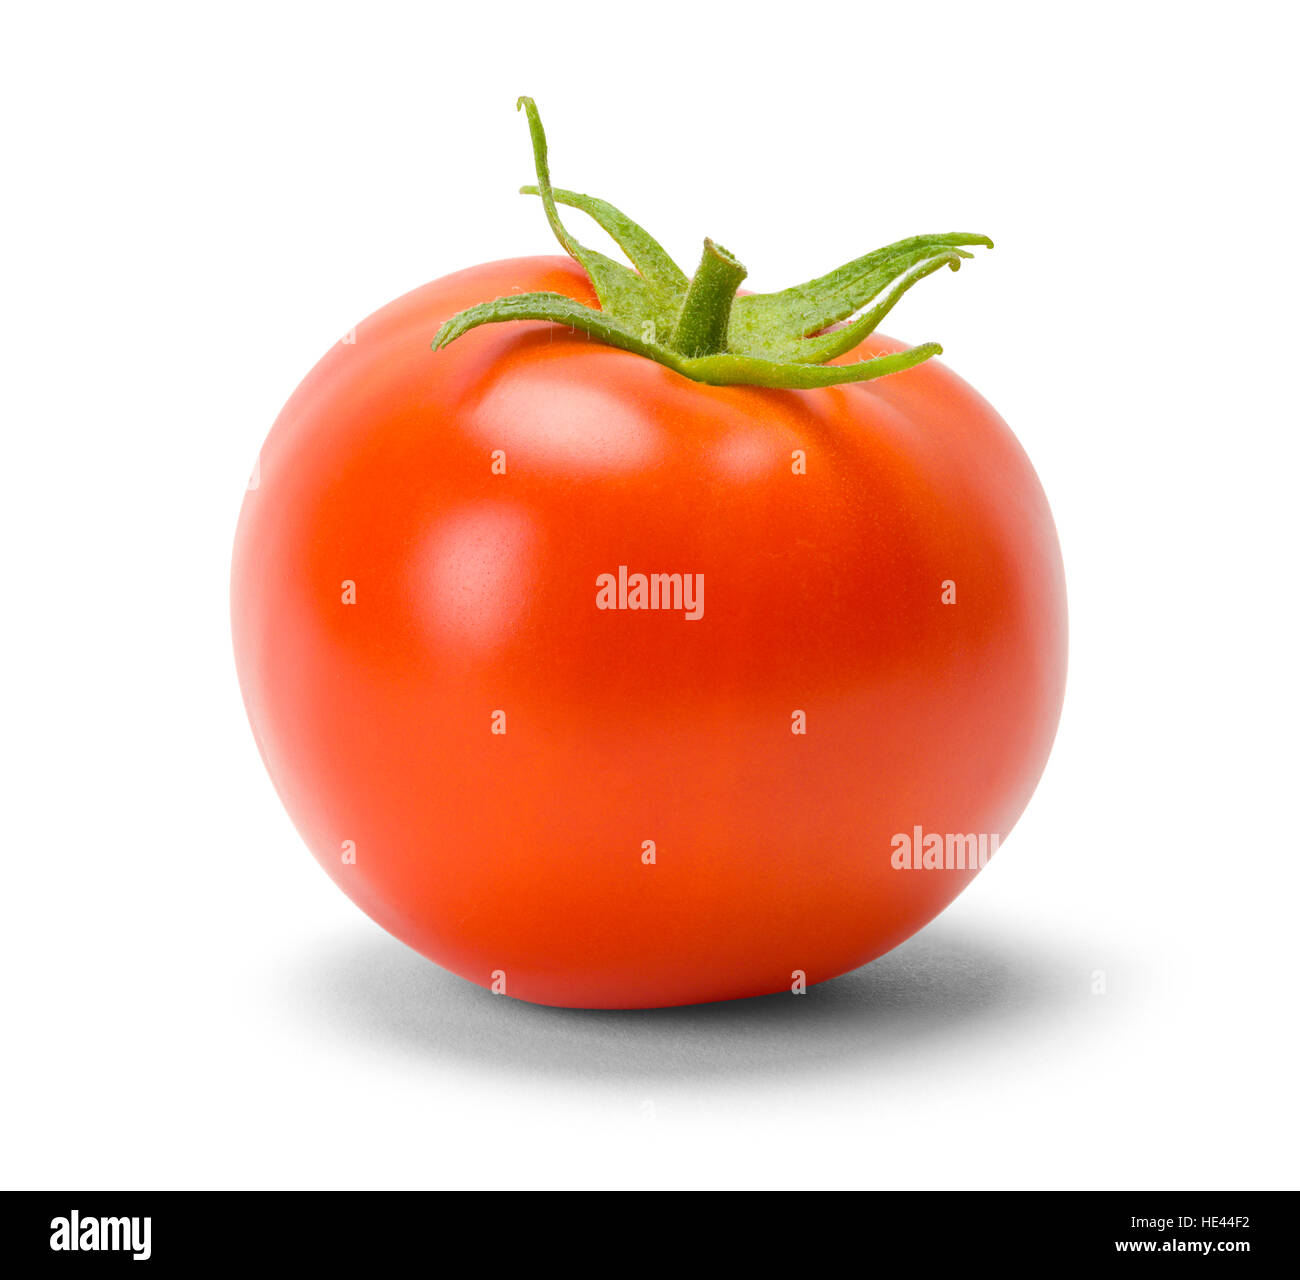 One Red New Tomato Isolated on White Background. Stock Photo